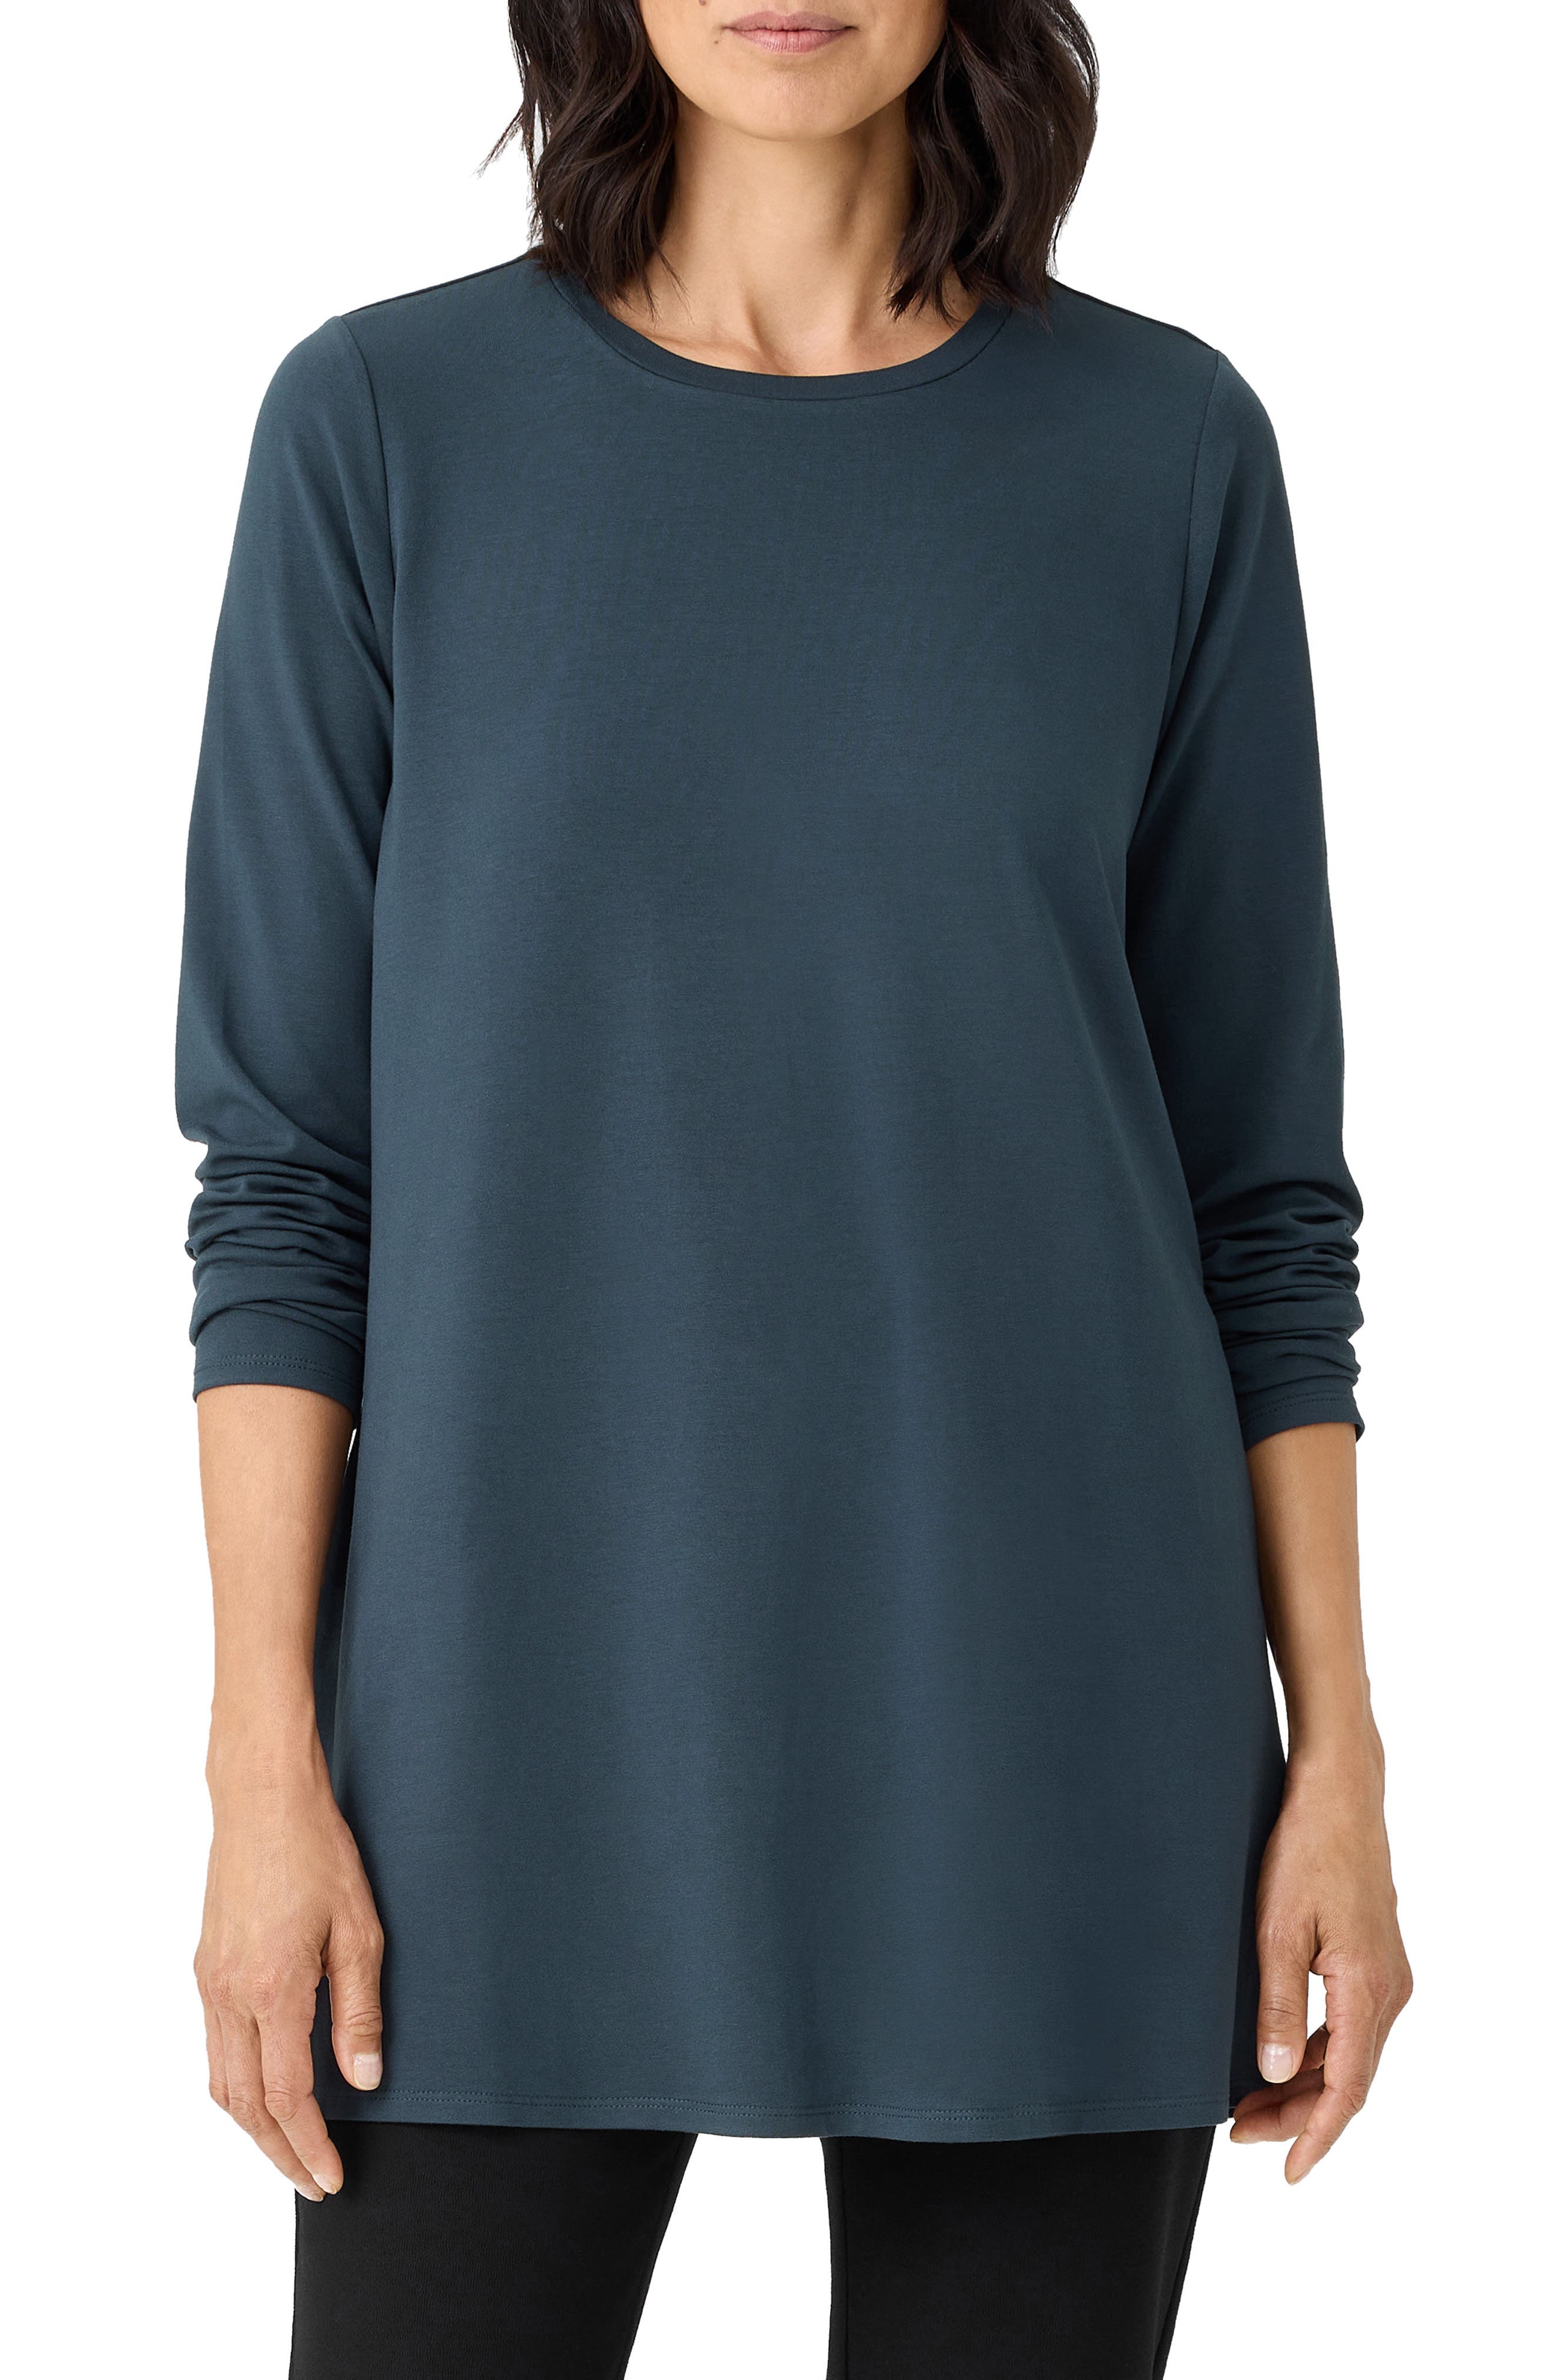 Eileen Fisher Cotton Raglan Top in Blue Womens Clothing Tops Long-sleeved tops Save 1% 